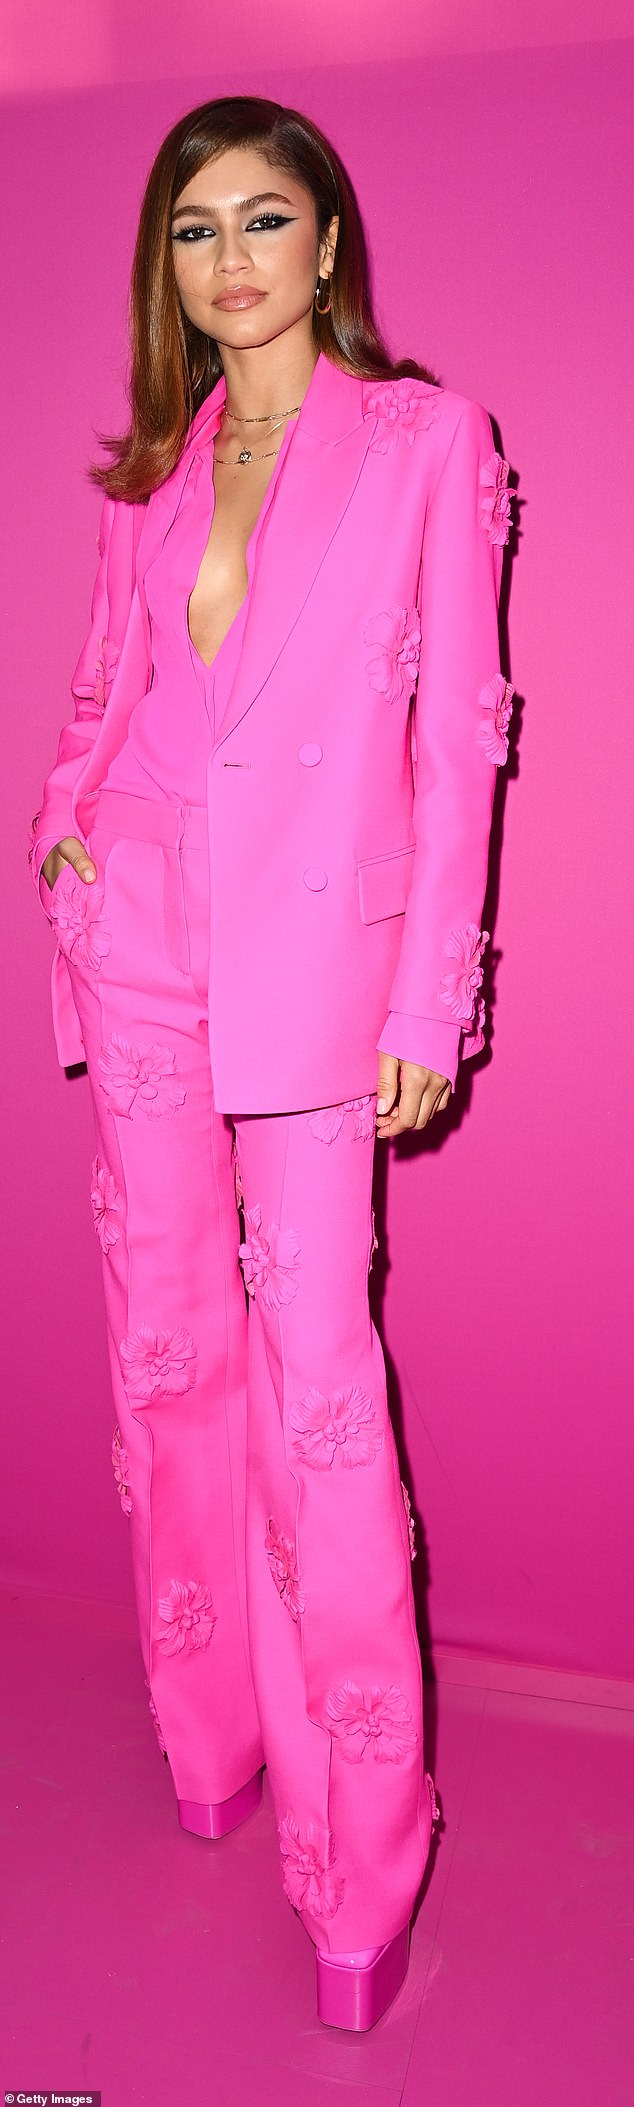 Zendaya (pictured) is pictured wearing hot pink at the 2022 Paris Fashion Week in Paris, France